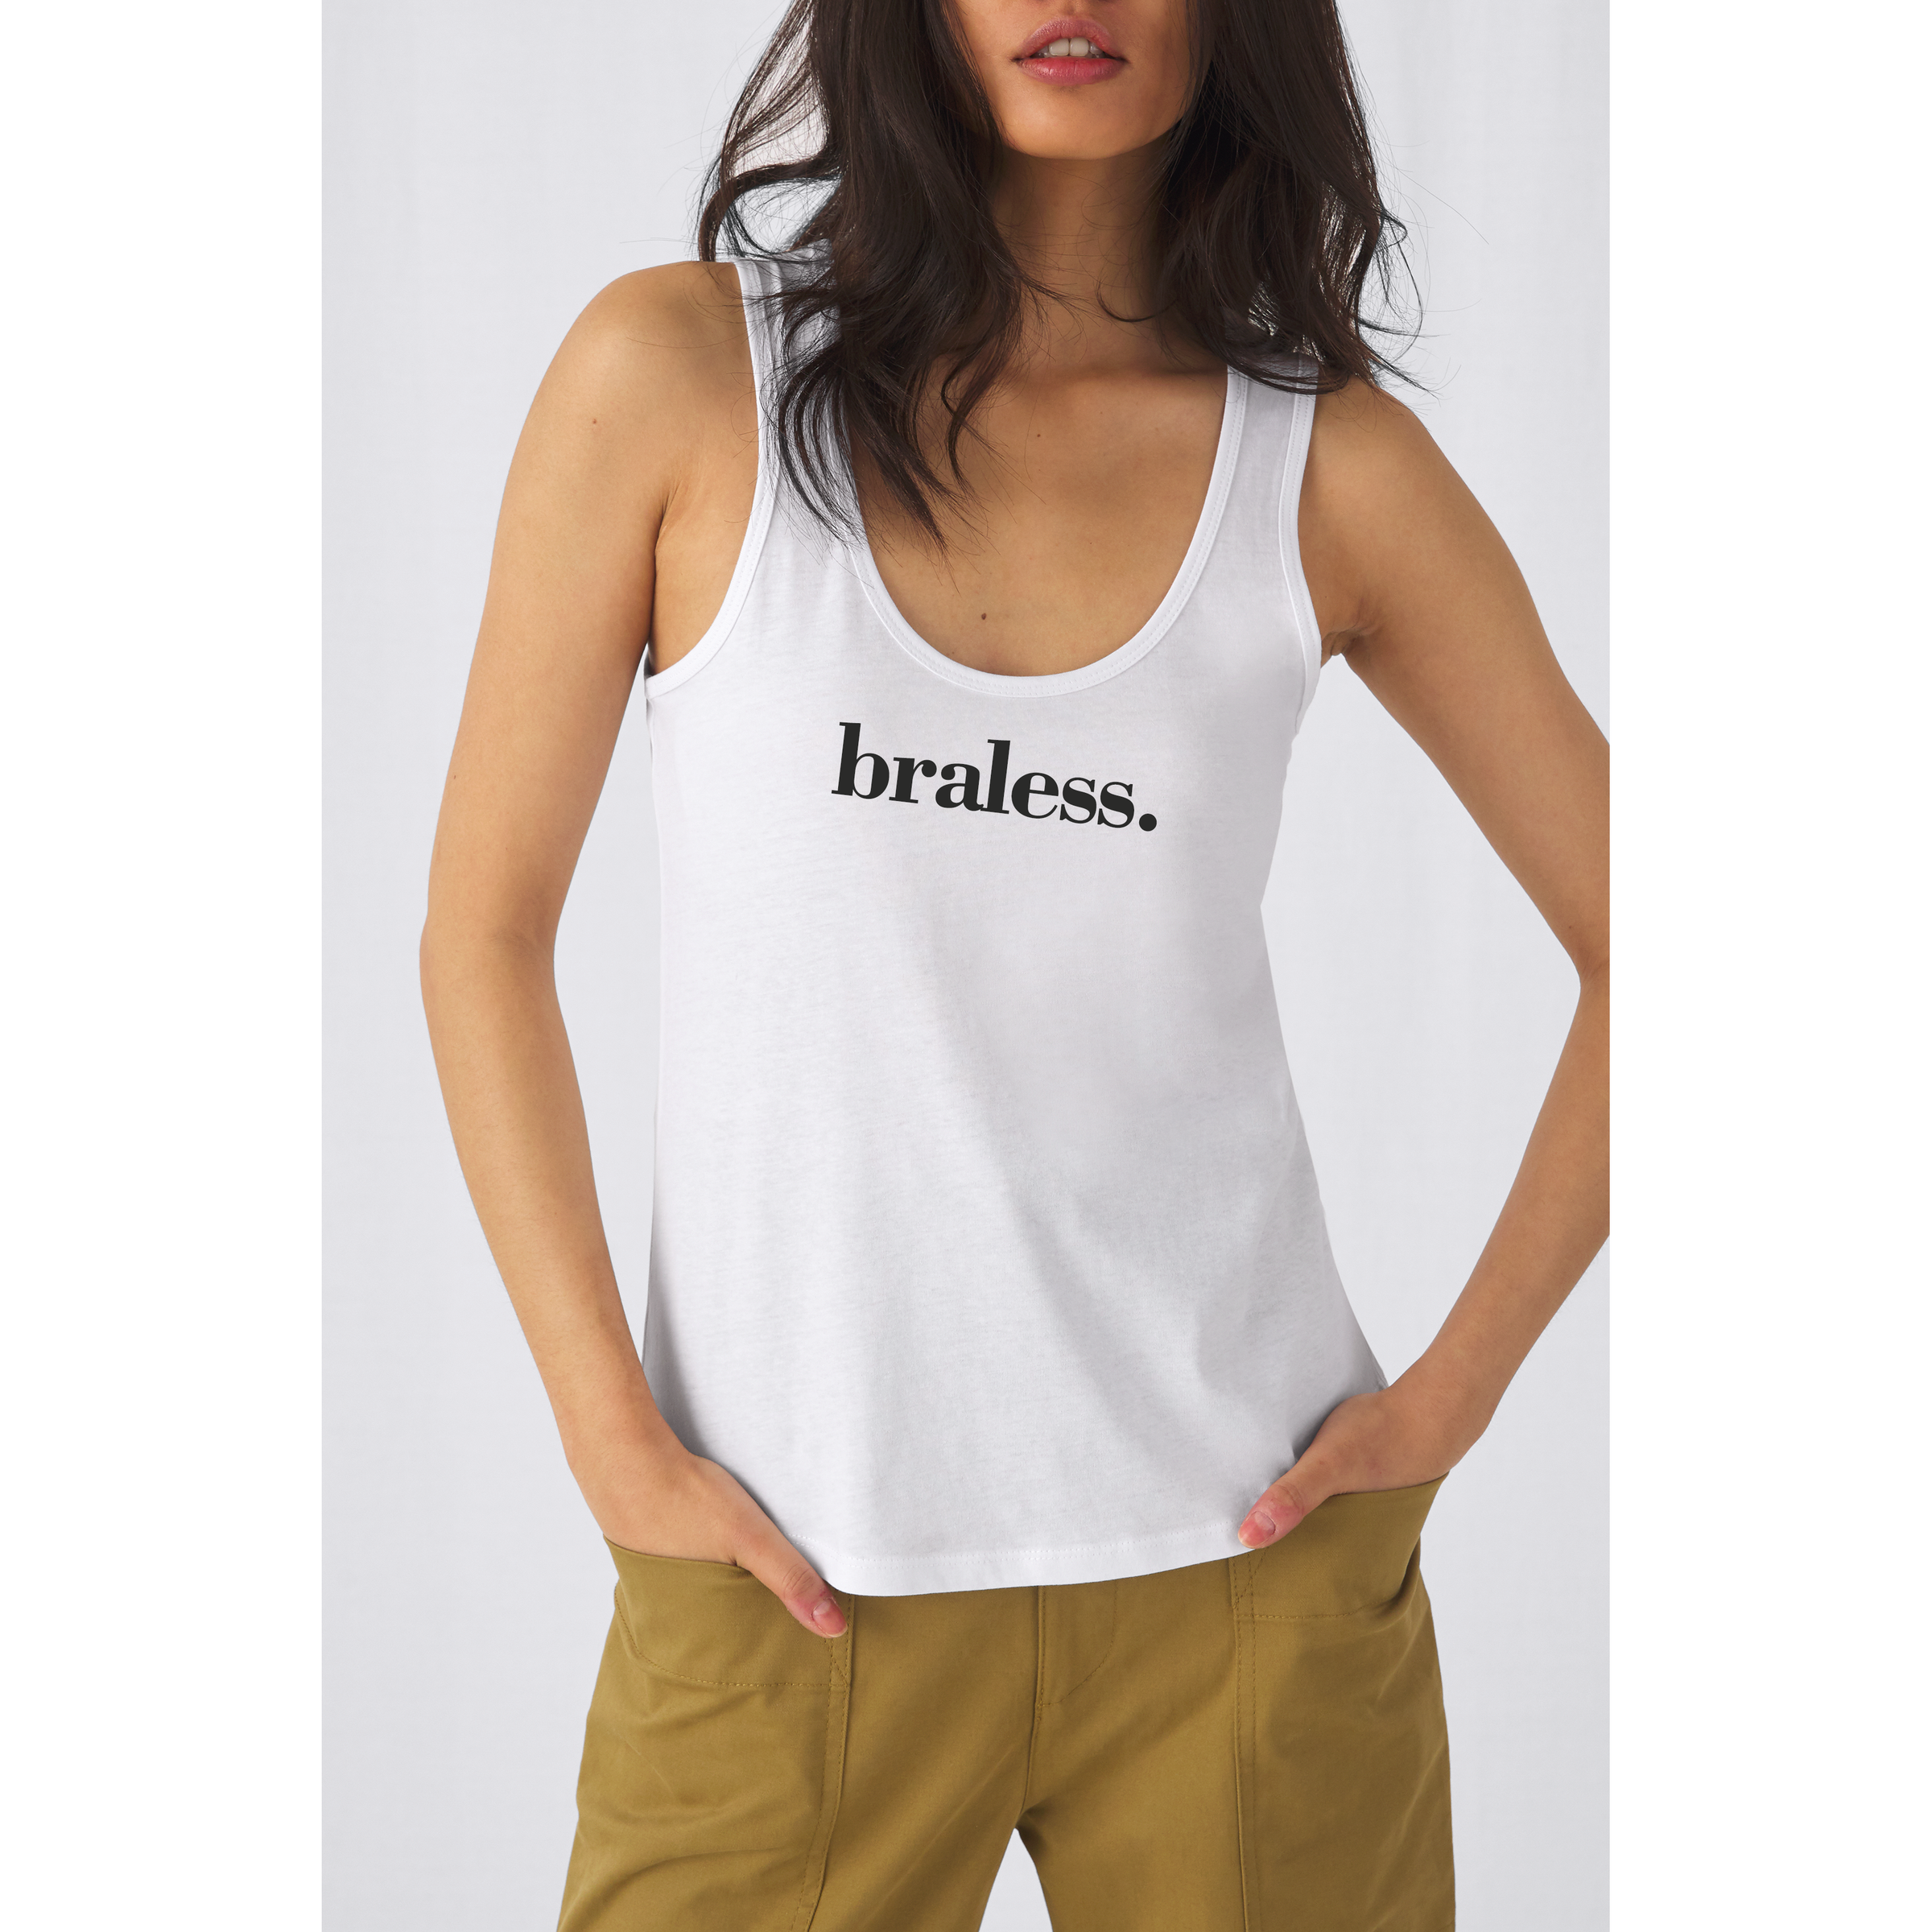 ashley curless recommends braless tank top pics pic